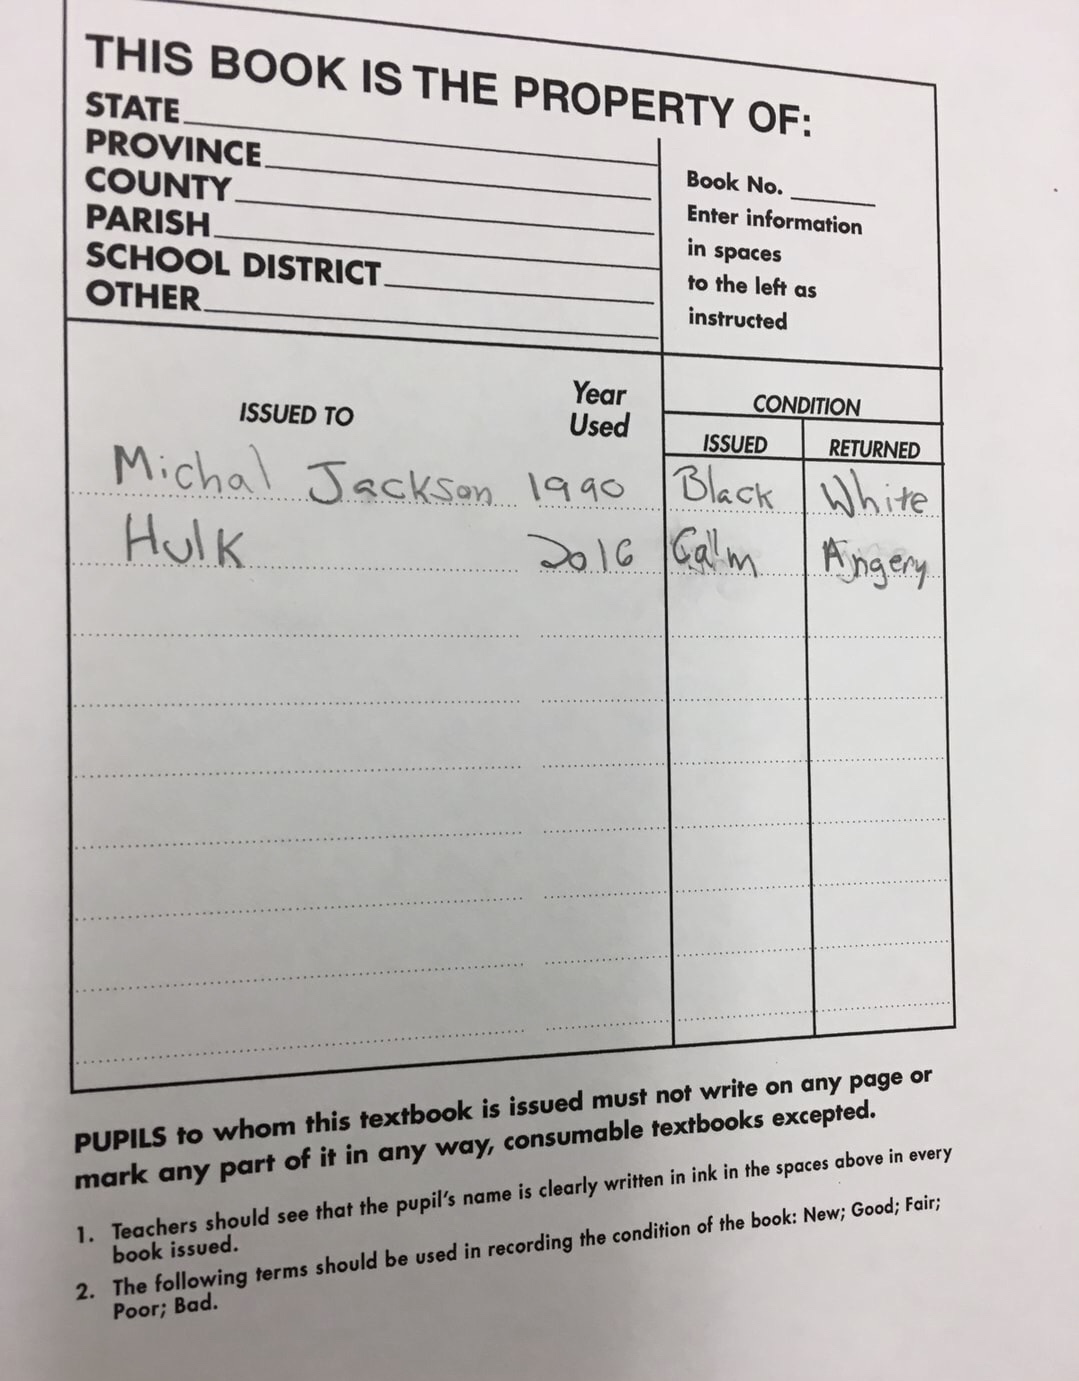 handwriting - This Book Is The Property Of State Province Book No. County Enter information Parish in spaces to the left as School District. Other instructed Year Used Issued To Michal Jackson 1990 Black White. Hulk 2016 Calm Angery. Condition Issued Retu